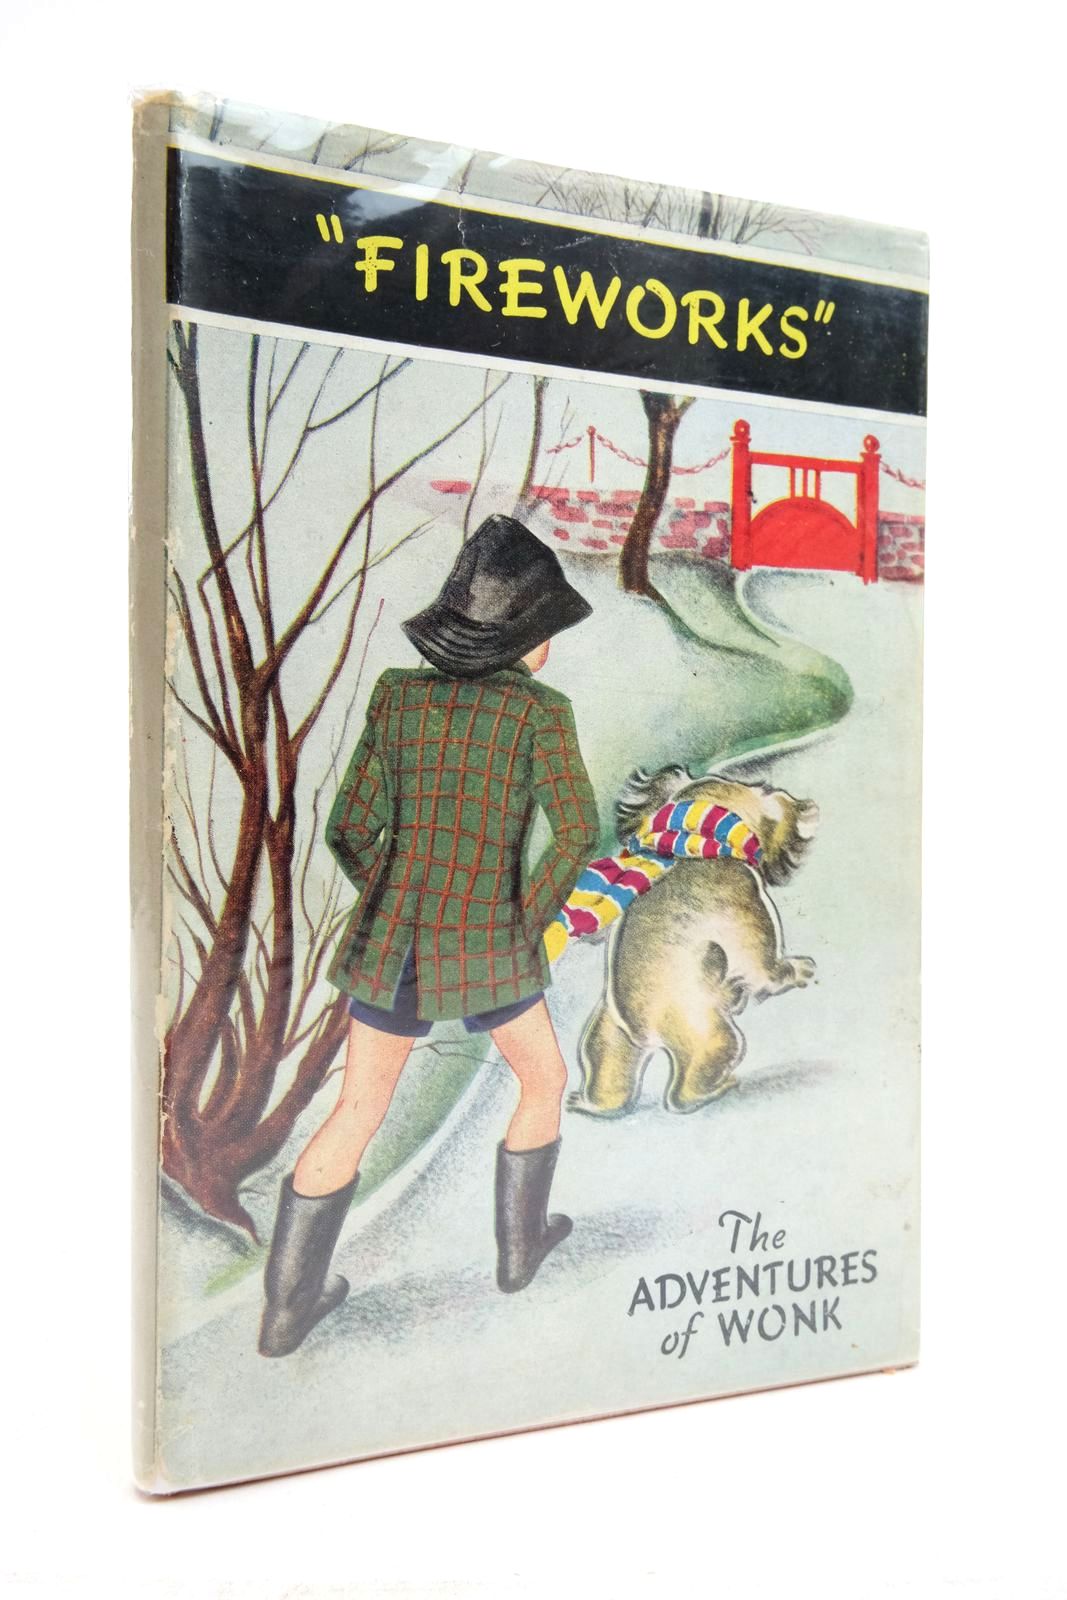 Photo of THE ADVENTURES OF WONK - FIREWORKS- Stock Number: 2136915